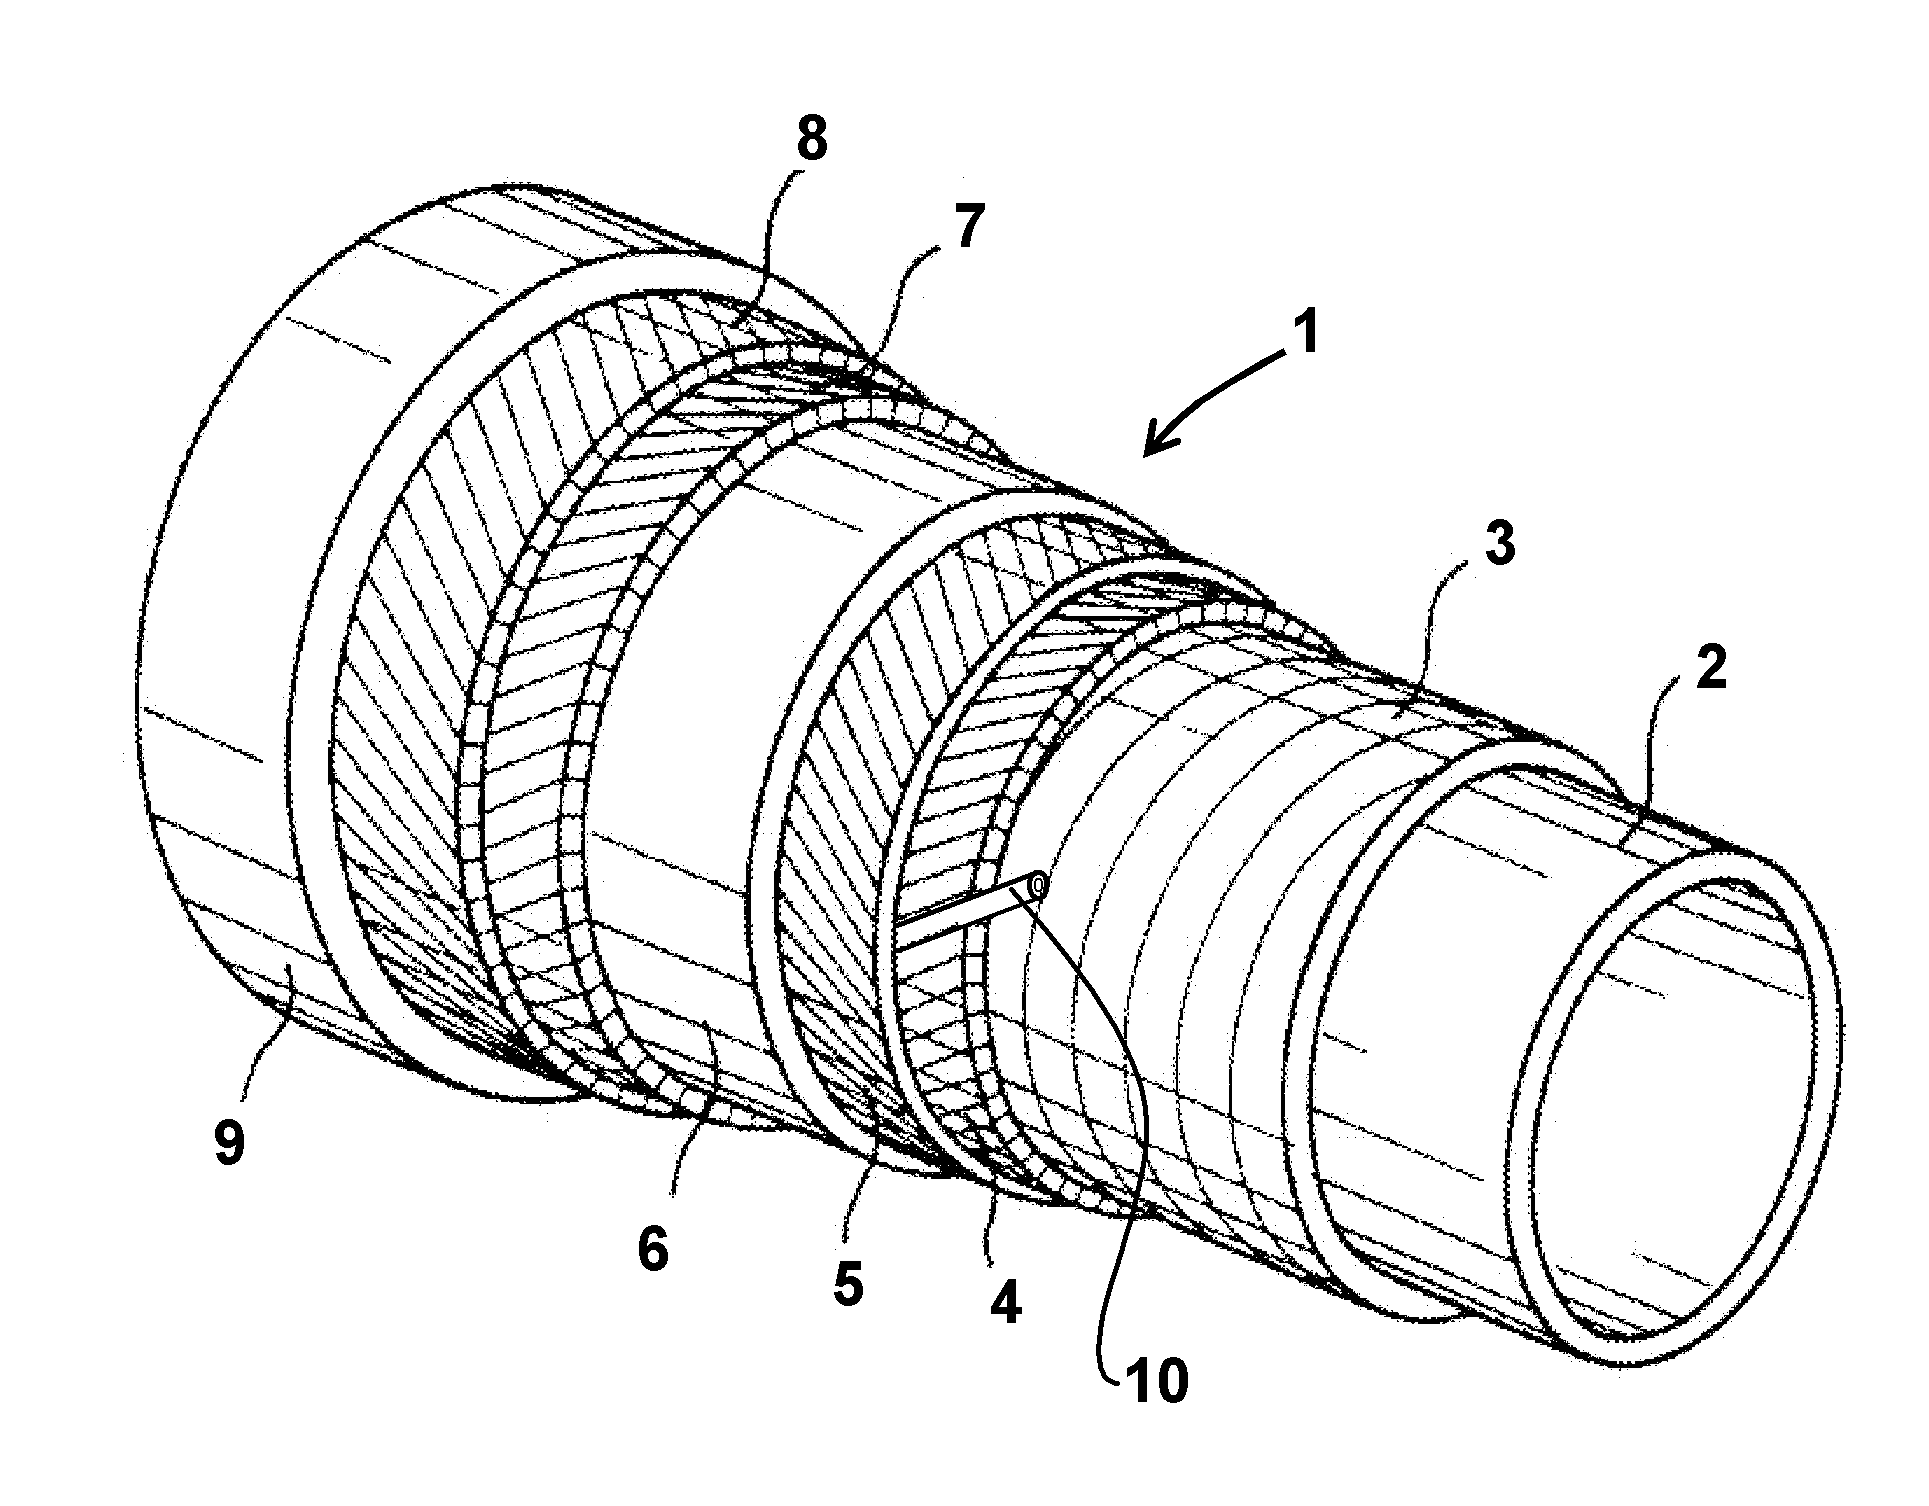 Flexible tubular pipe for transporting gaseous hydrocarbons